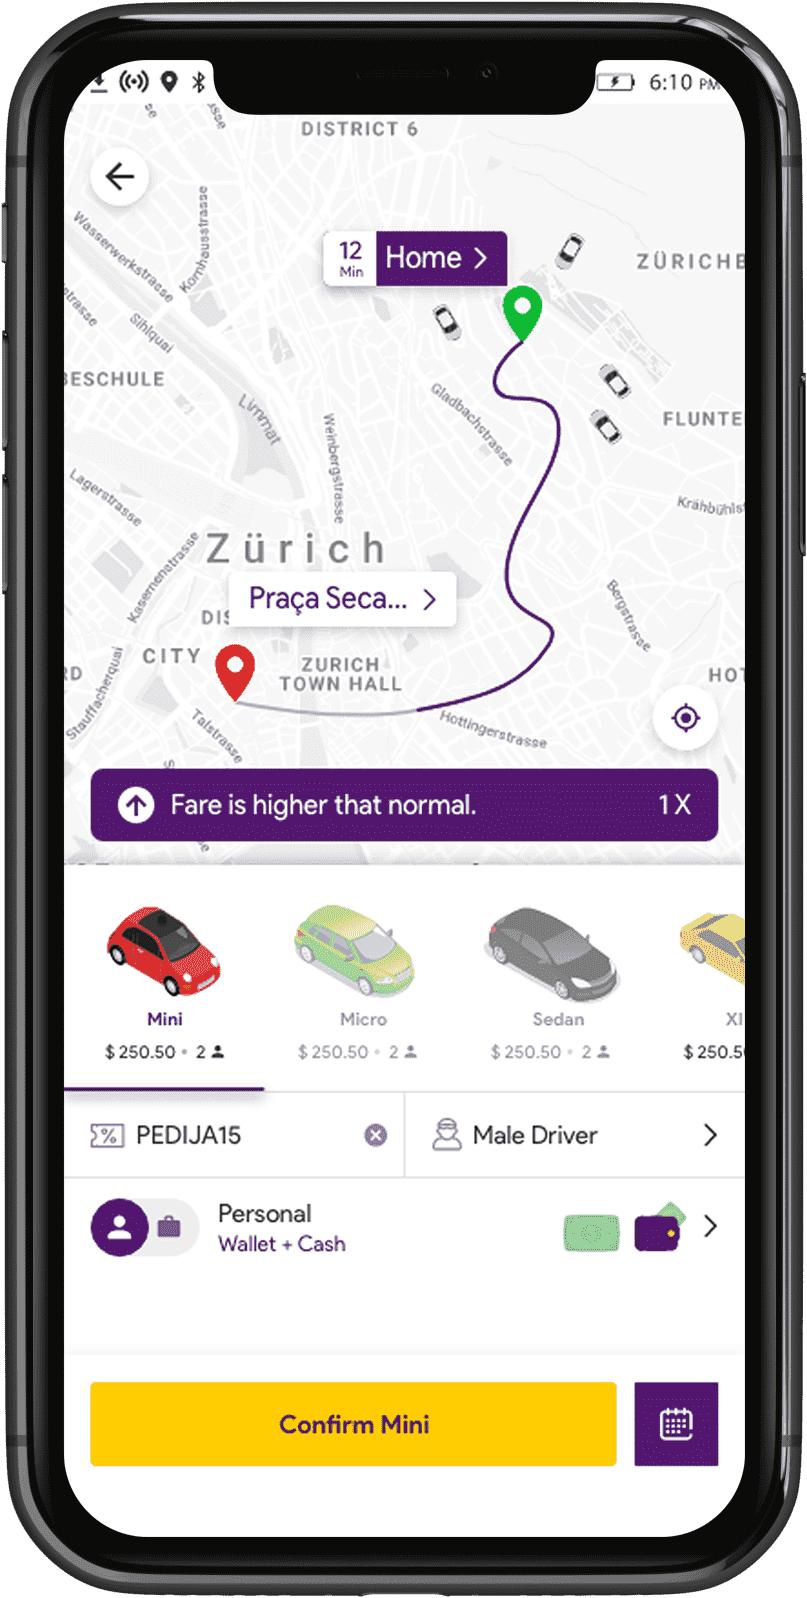 select-type-of-veichle-in-ride-sharing-customer-app.png